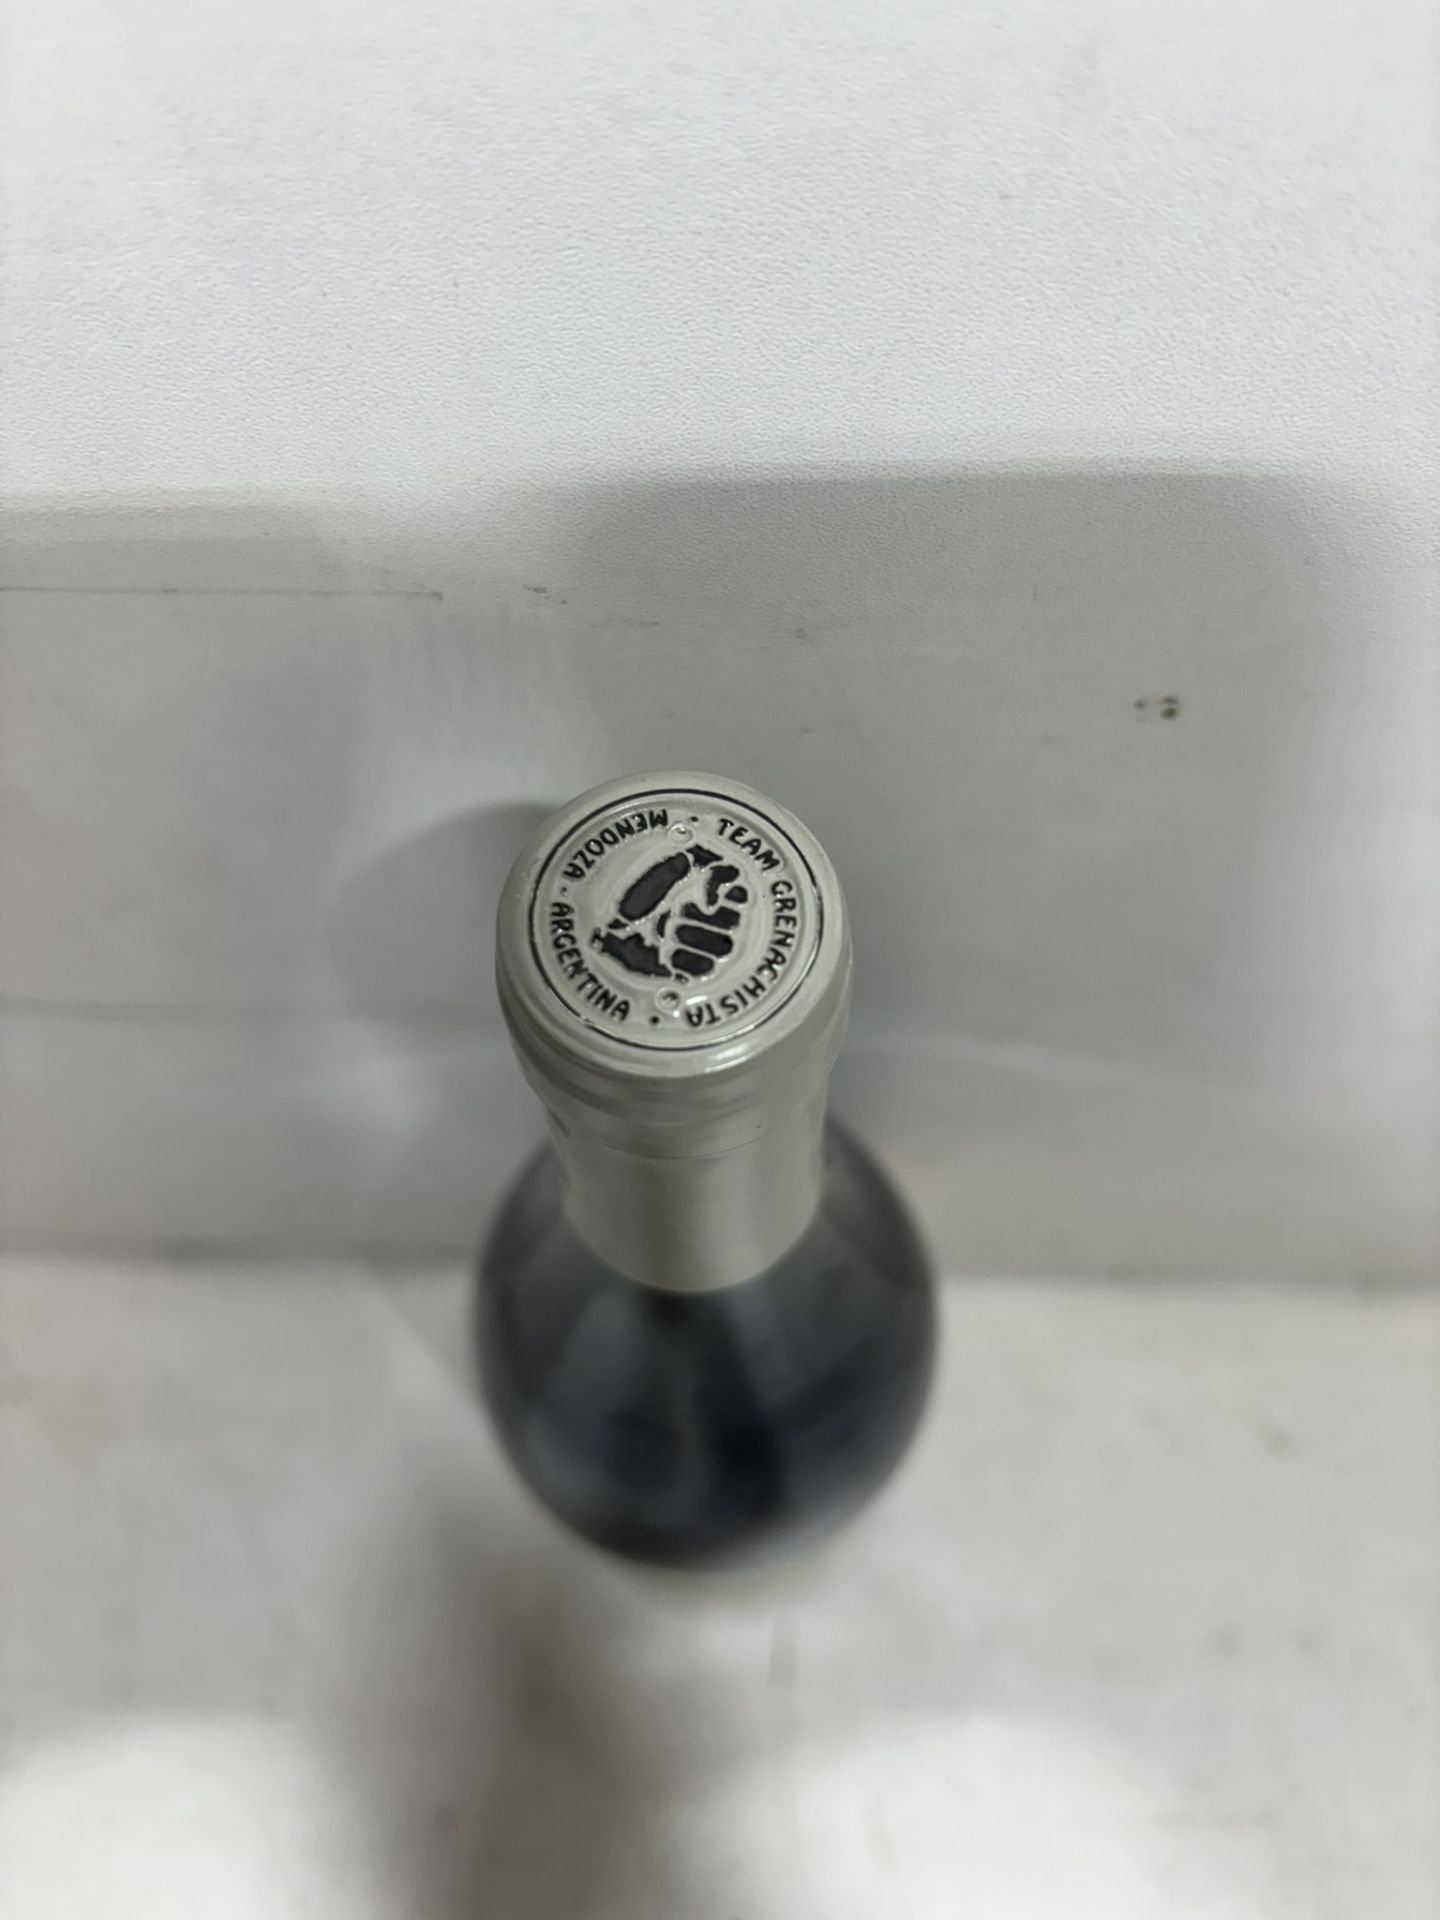 8 X Bottles Of Ver Sacrum G.S.M Field Blend 2018 Los Chacayes, Mendoza, Red Wine - Image 4 of 4